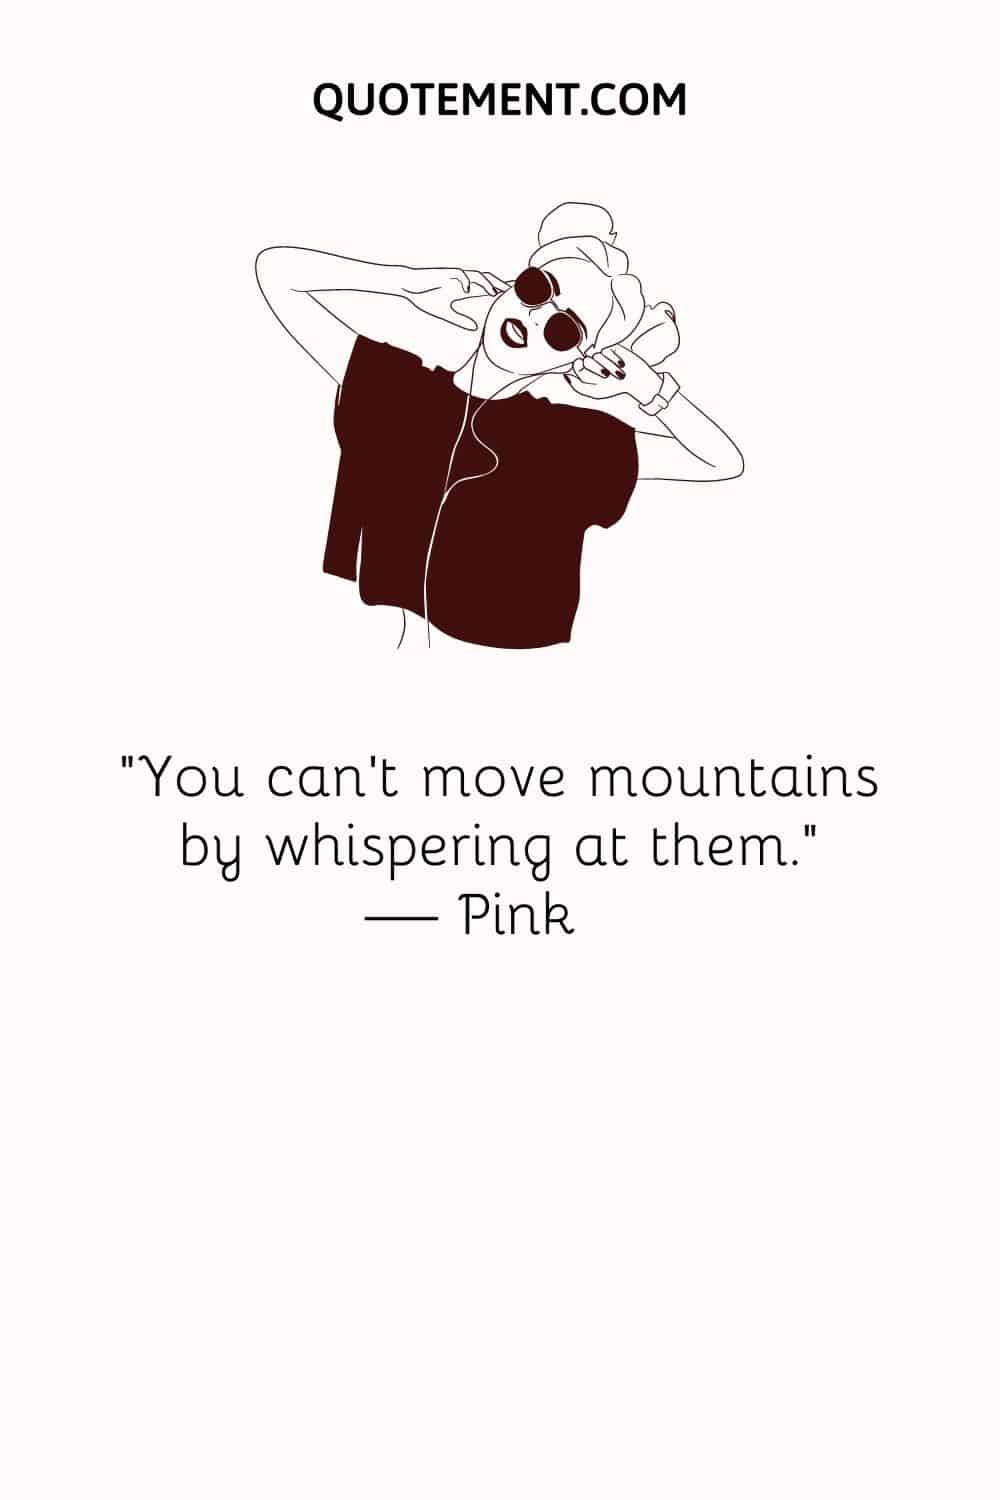 “You can’t move mountains by whispering at them.” — Pink